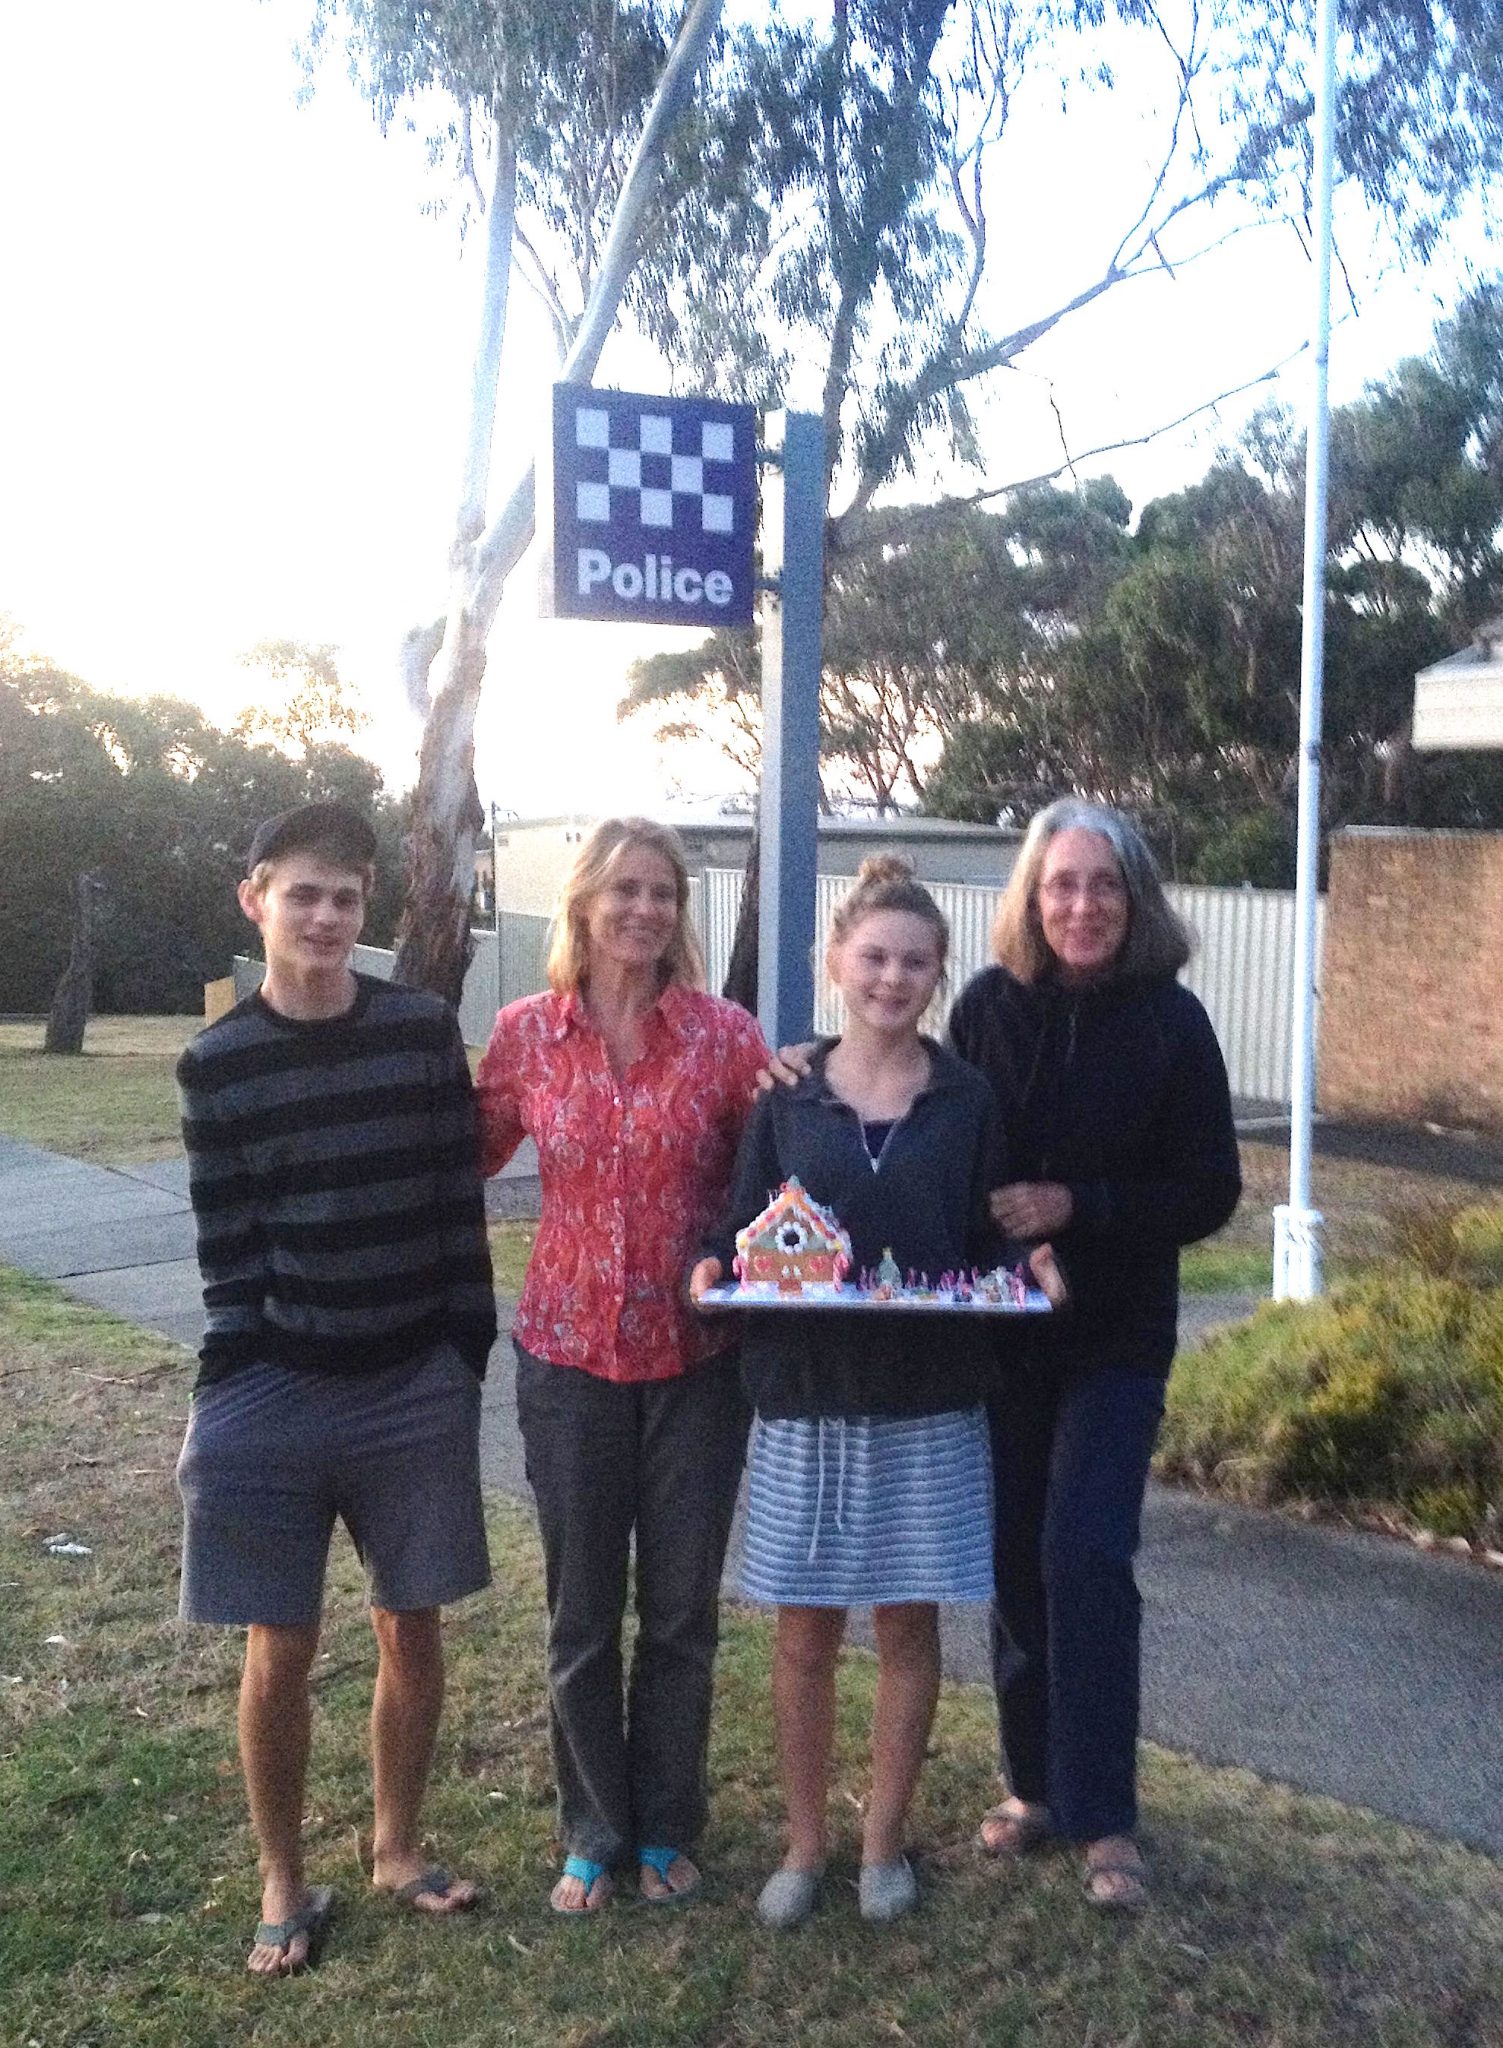 131. Gabrielle, Beatrice, Josh and I stand in front of the police department on Phillip Island. Gabrielle chose to give the gingerbread house she made to the policemen for Christmas